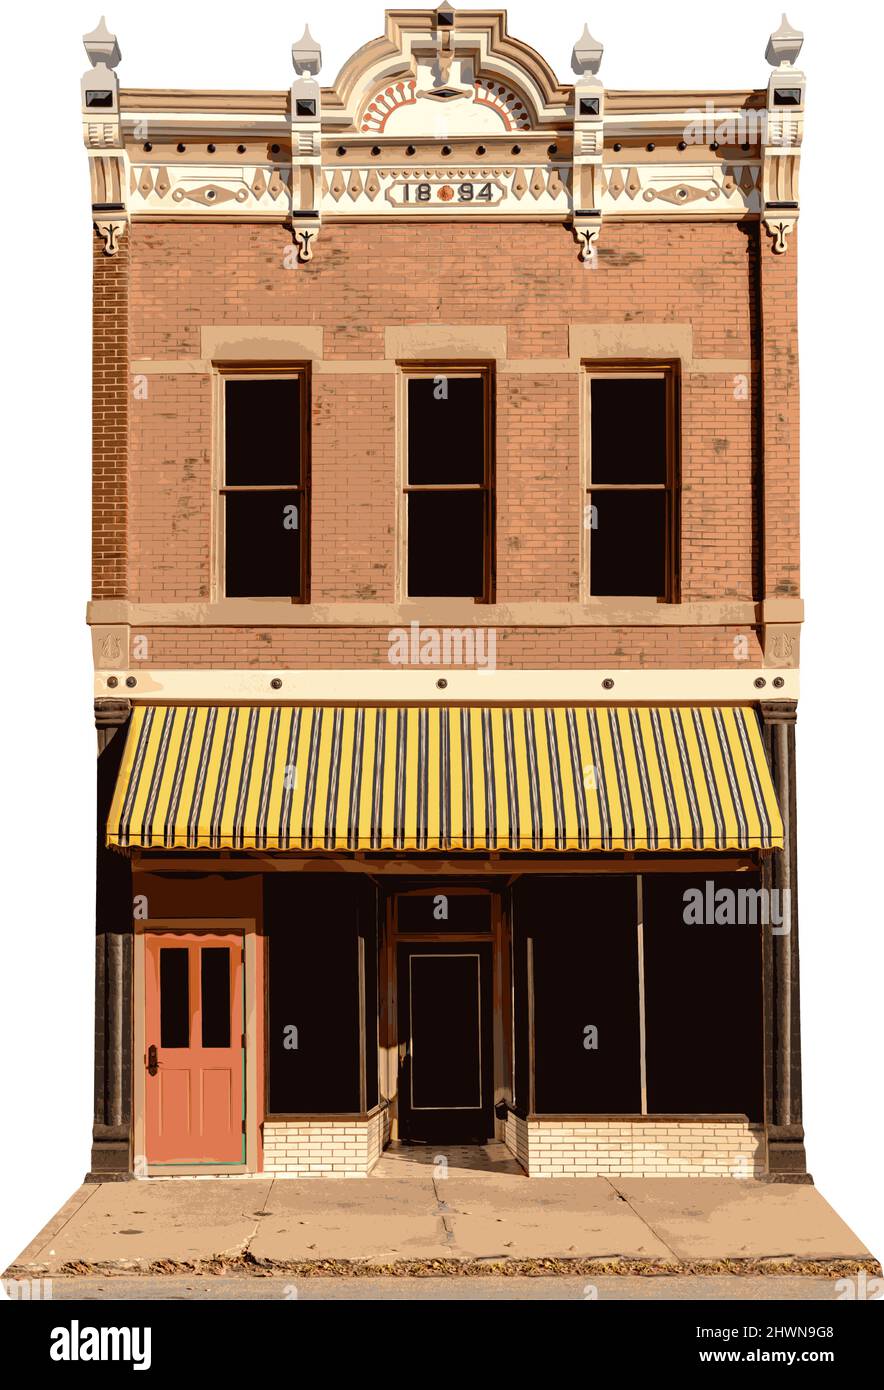 Vector graphic depicting an architectural elevation of a turn of the century building facade. Stock Vector